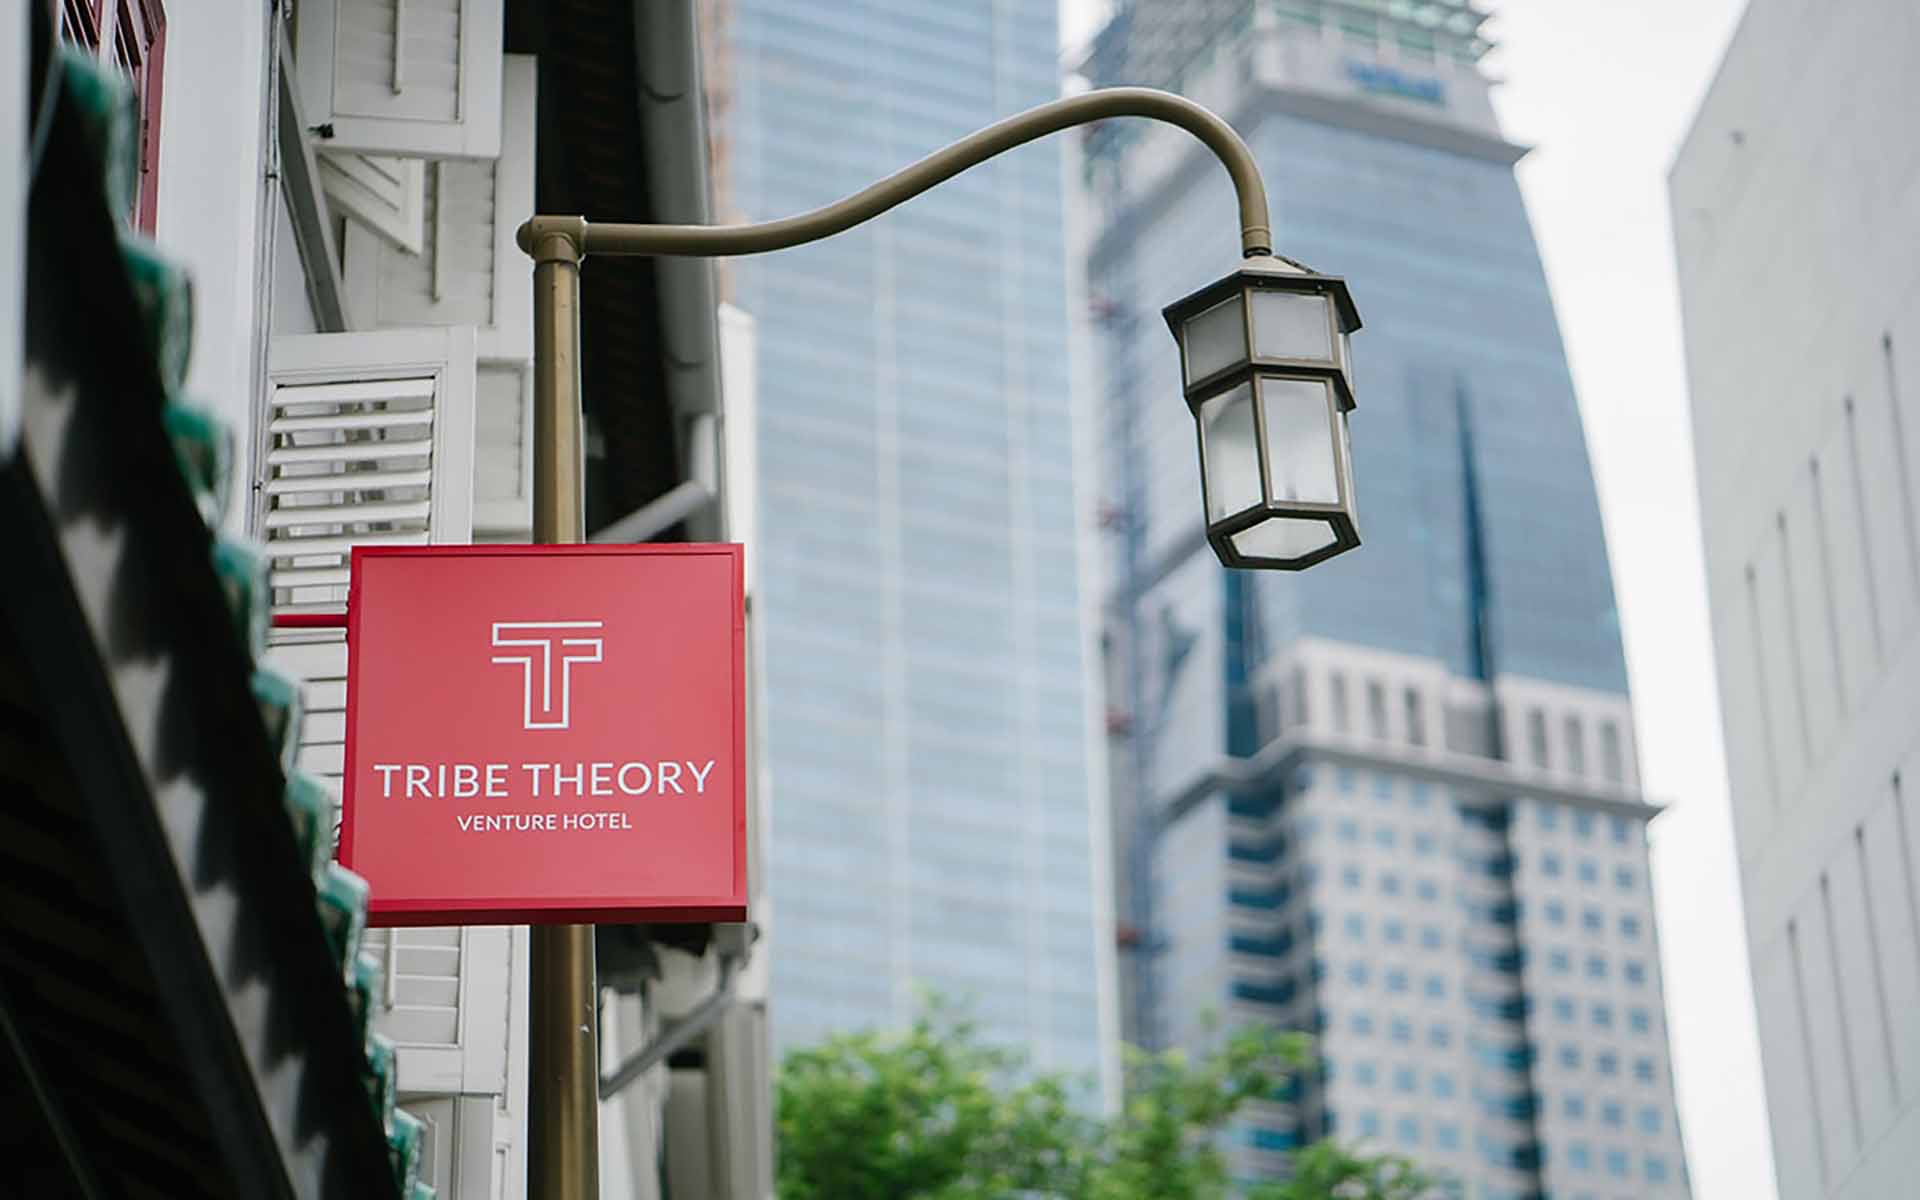 Entrepreneurs-Only Venture Hotel Tribe Theory to Accept Bitcoin, Ethereum